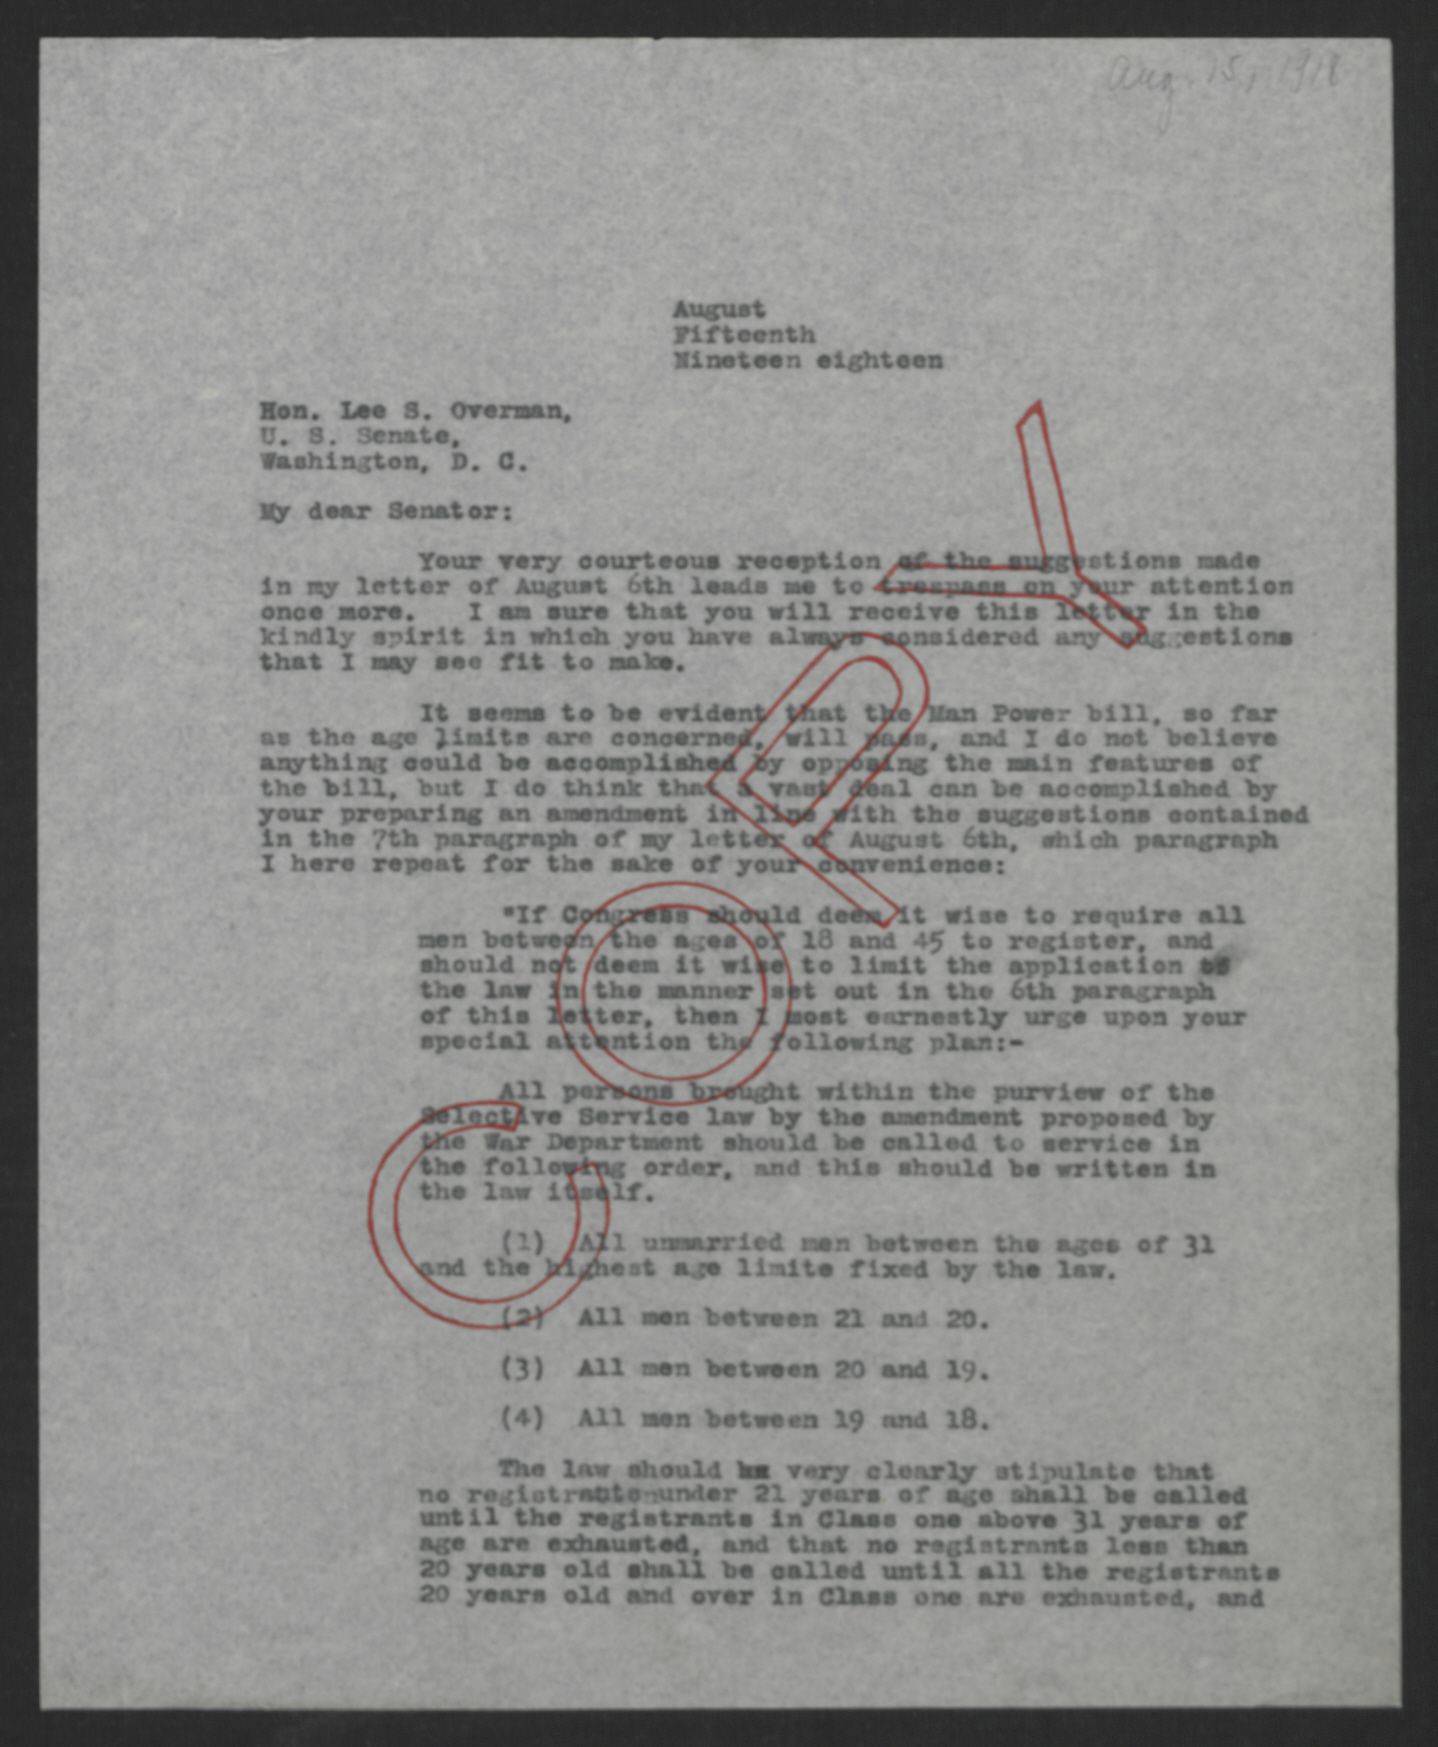 Letter from Thomas W. Bickett to Lee S. Overman, August 15, 1918, page 1